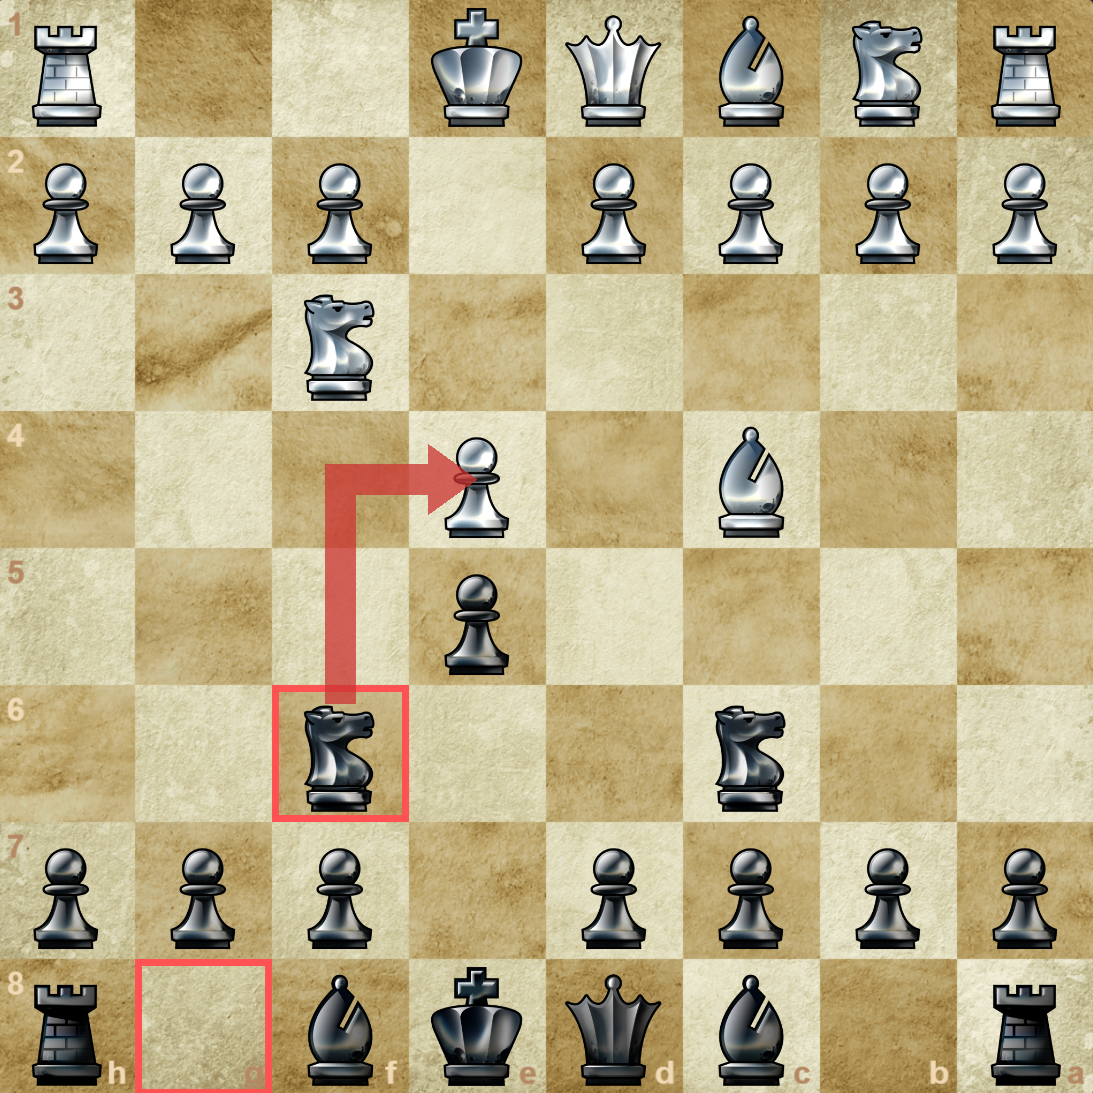 How Does The Rook Move In Chess? (In-Depth Guide!)